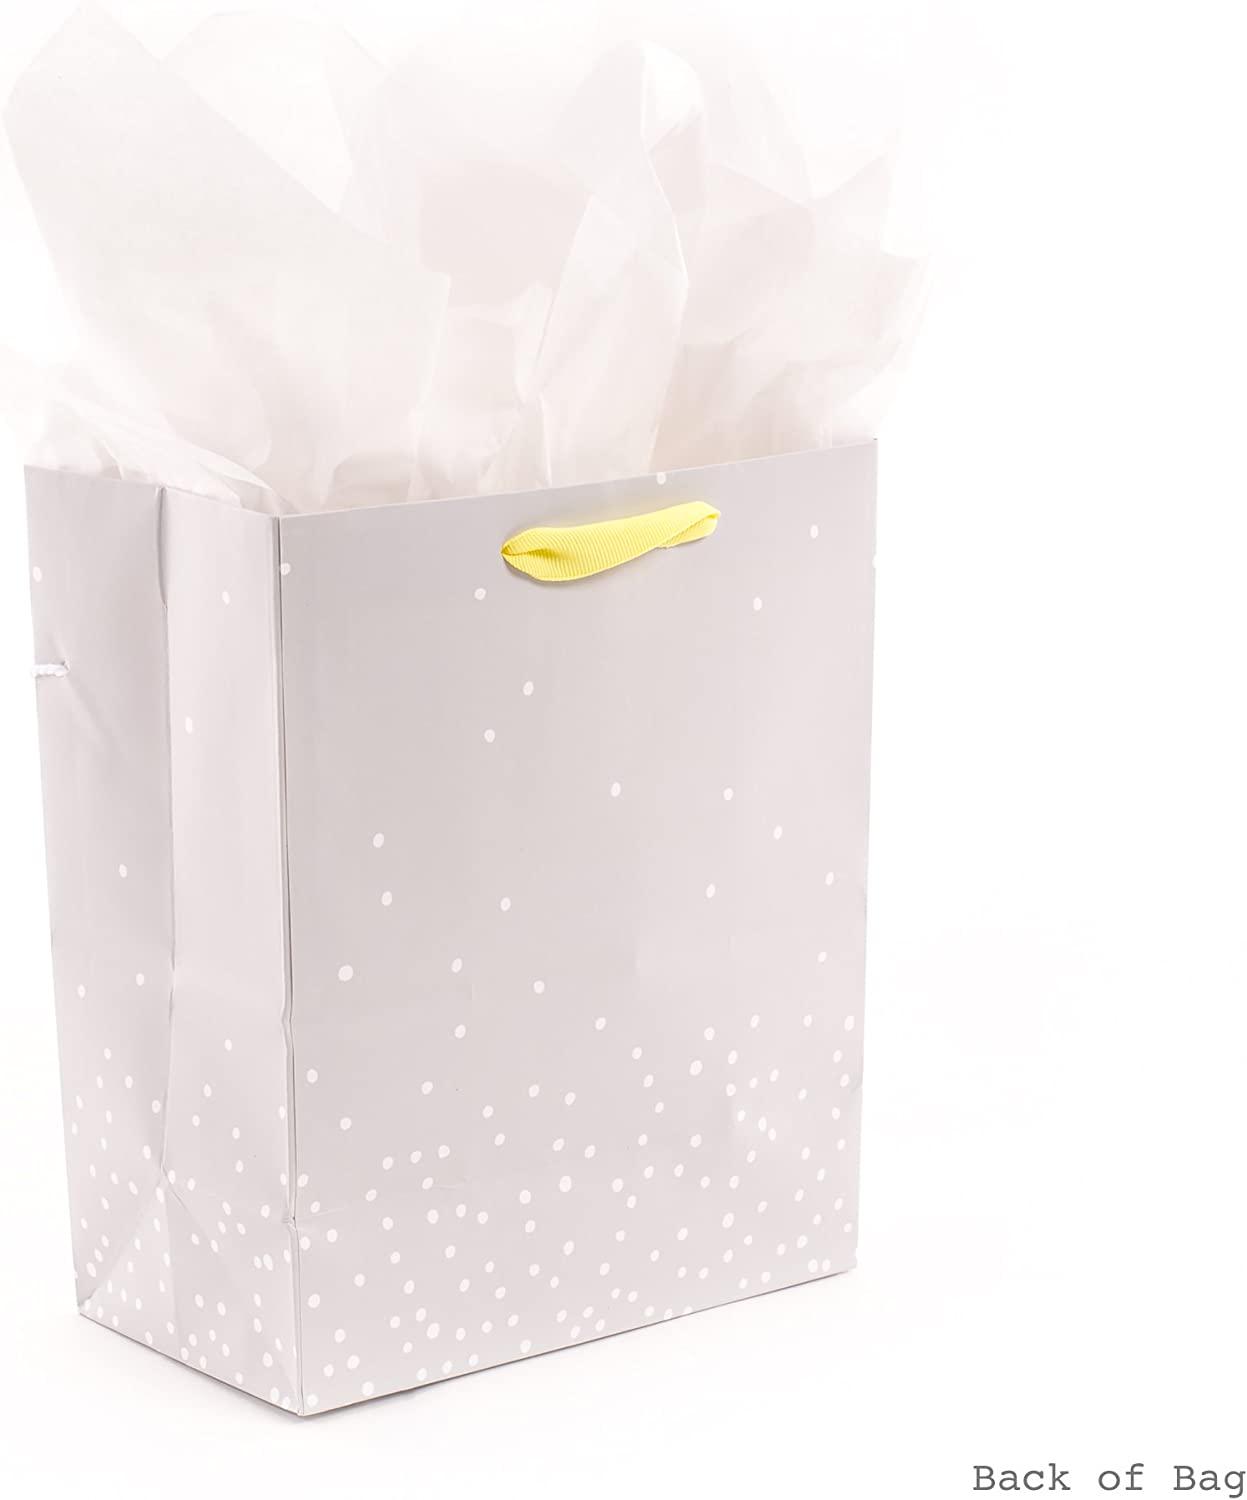 Nihuecne 9 Gift Bags Medium Size with Tissue Paper, 4 Pack White Gold Wrap  Paper Gift Bags with Handles for Shopping Parties Wedding Baby Shower